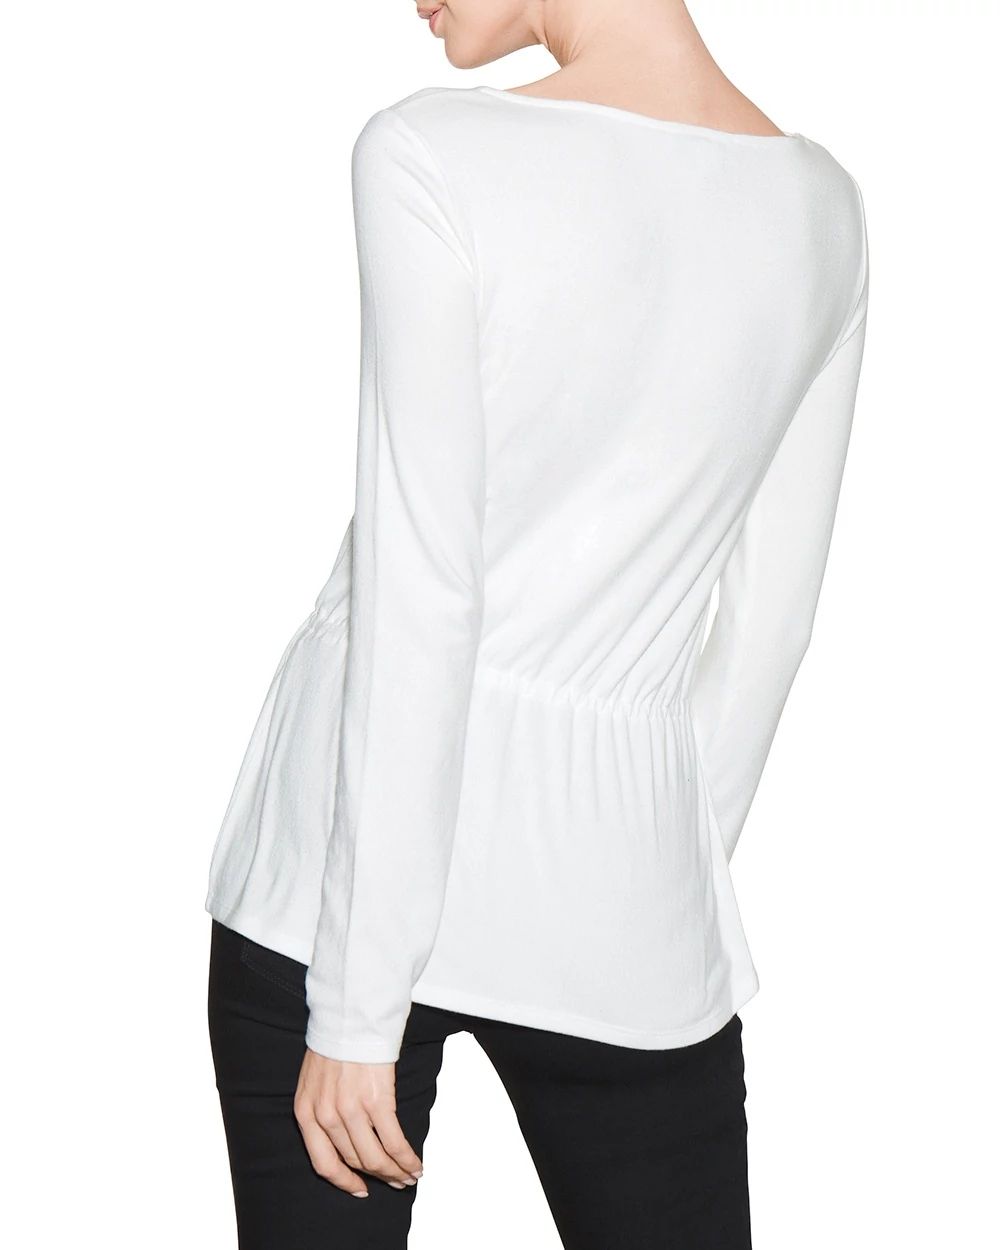 Outlet WHBM Cozy Tie-Front Knit Top click to view larger image.